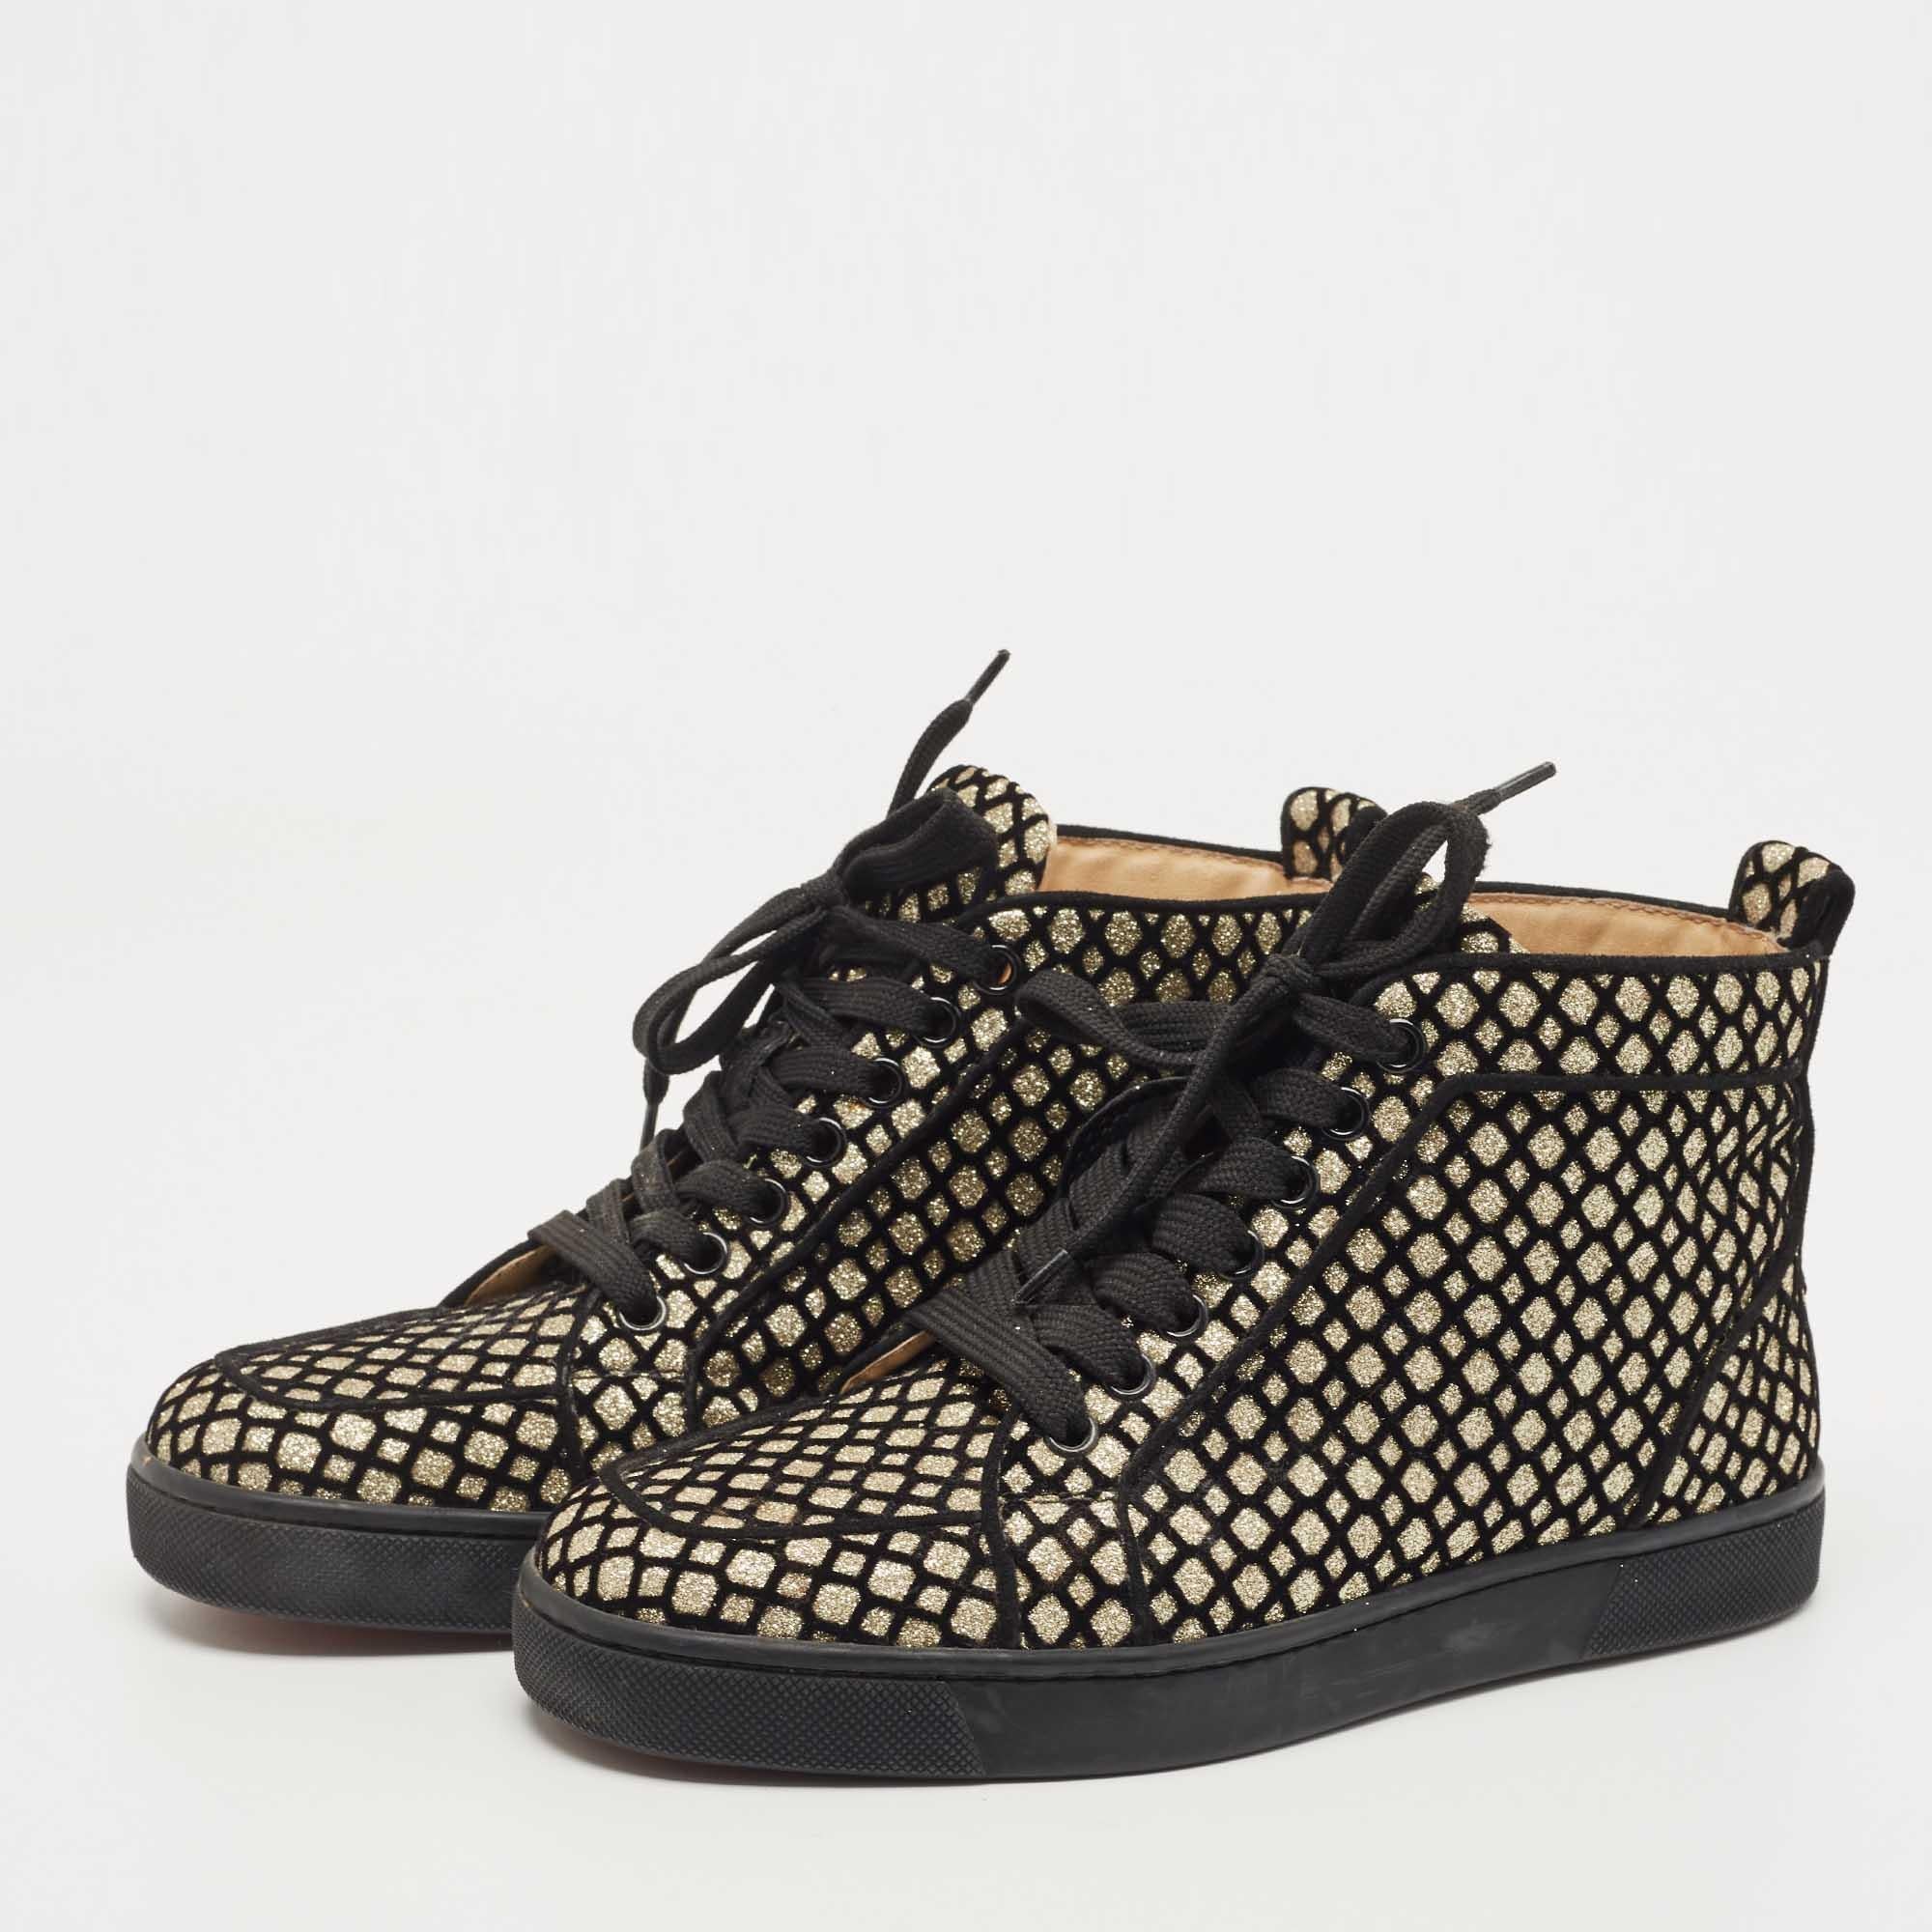 Stand out in a crowd in this pair of Rantus Orlato sneakers by Christian Louboutin. They are designed in high-top silhouette and feature a glamorous appeal. These lace-up shoes have contrasting black piping and the signature red rubber sole. The